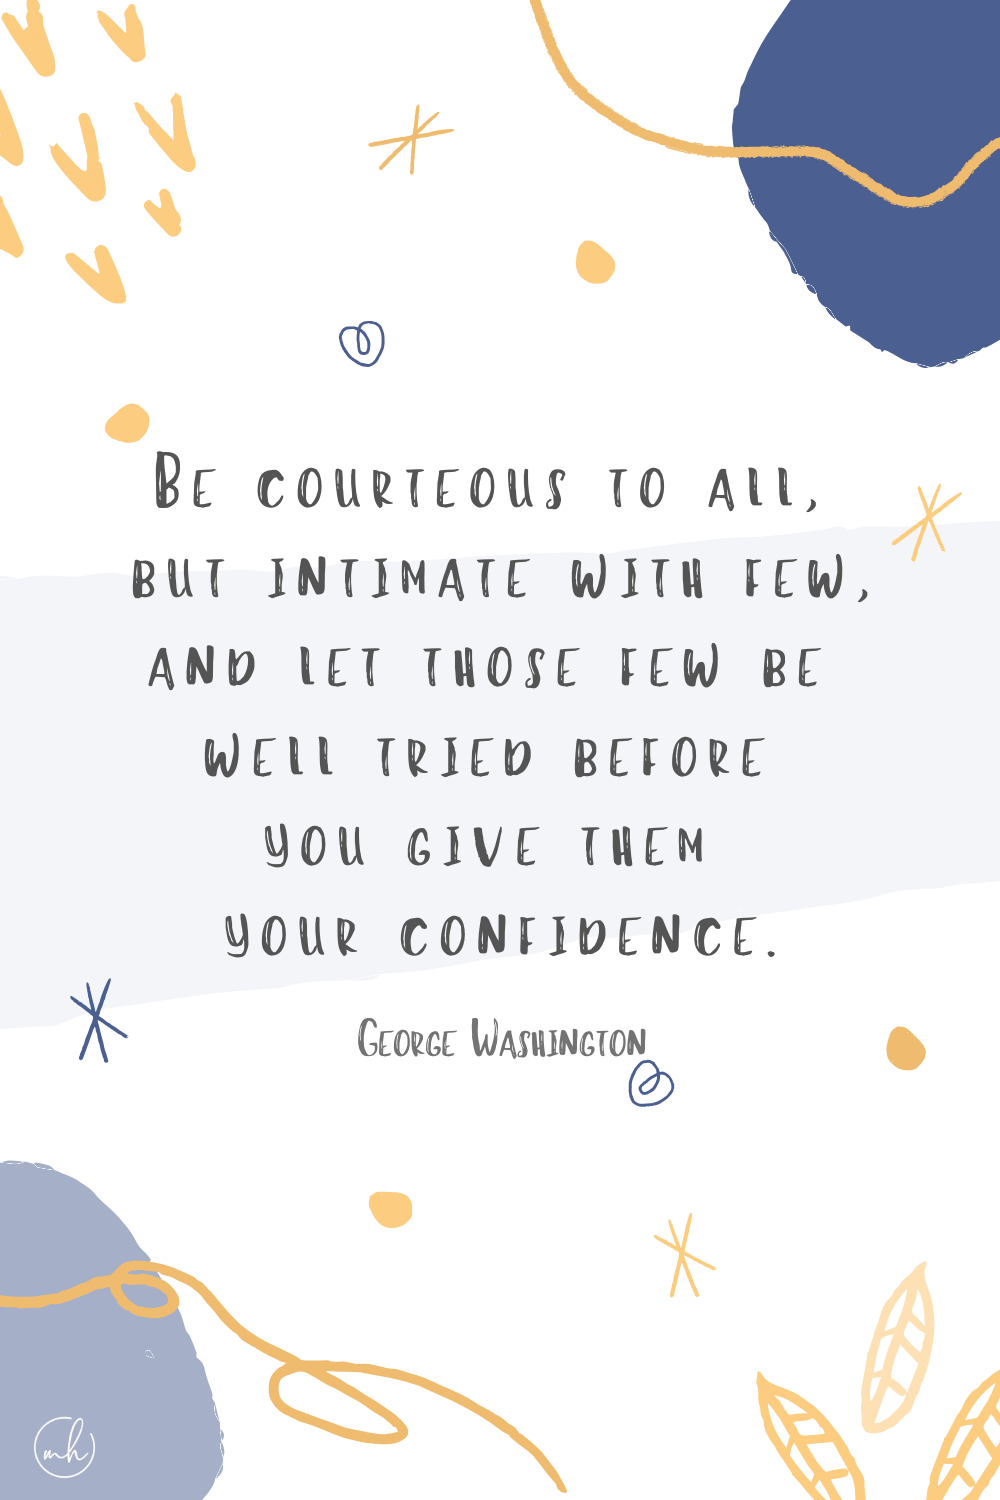 “Be courteous to all, but intimate with few, and let those few be well tried before you give them your confidence.” - George Washington